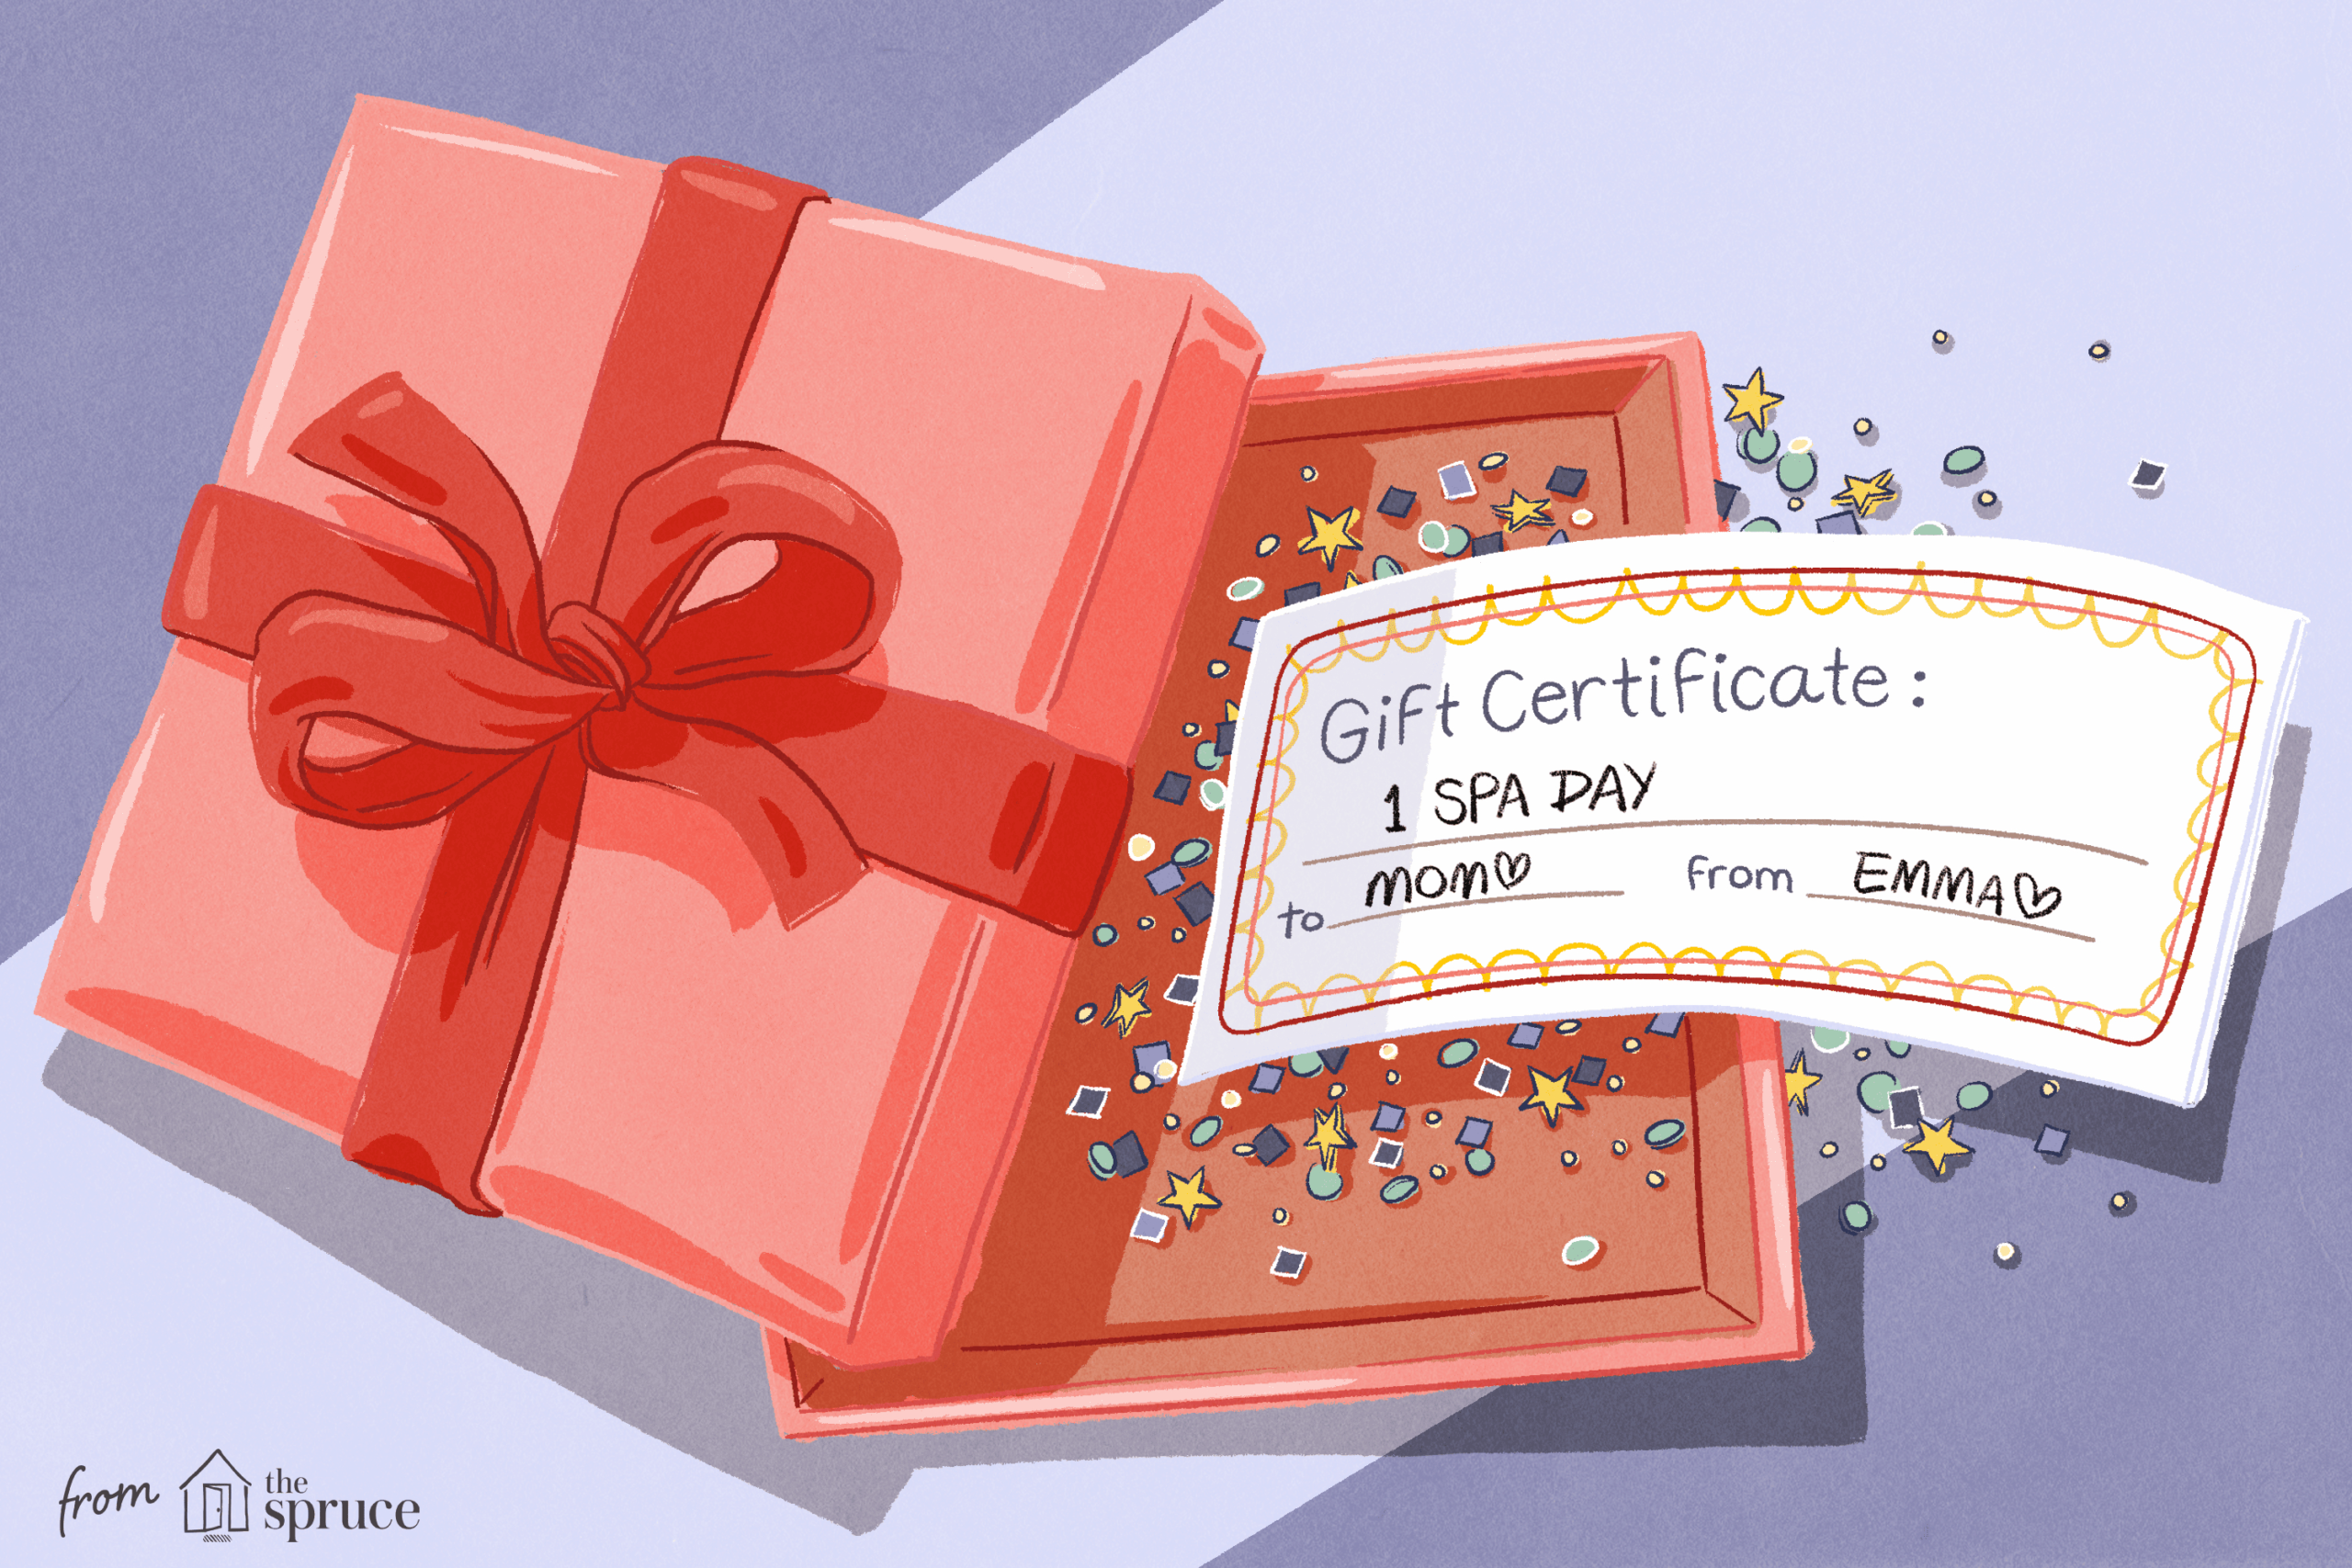 Free Gift Certificate Templates You Can Customize For Free Travel Gift Certificate Template